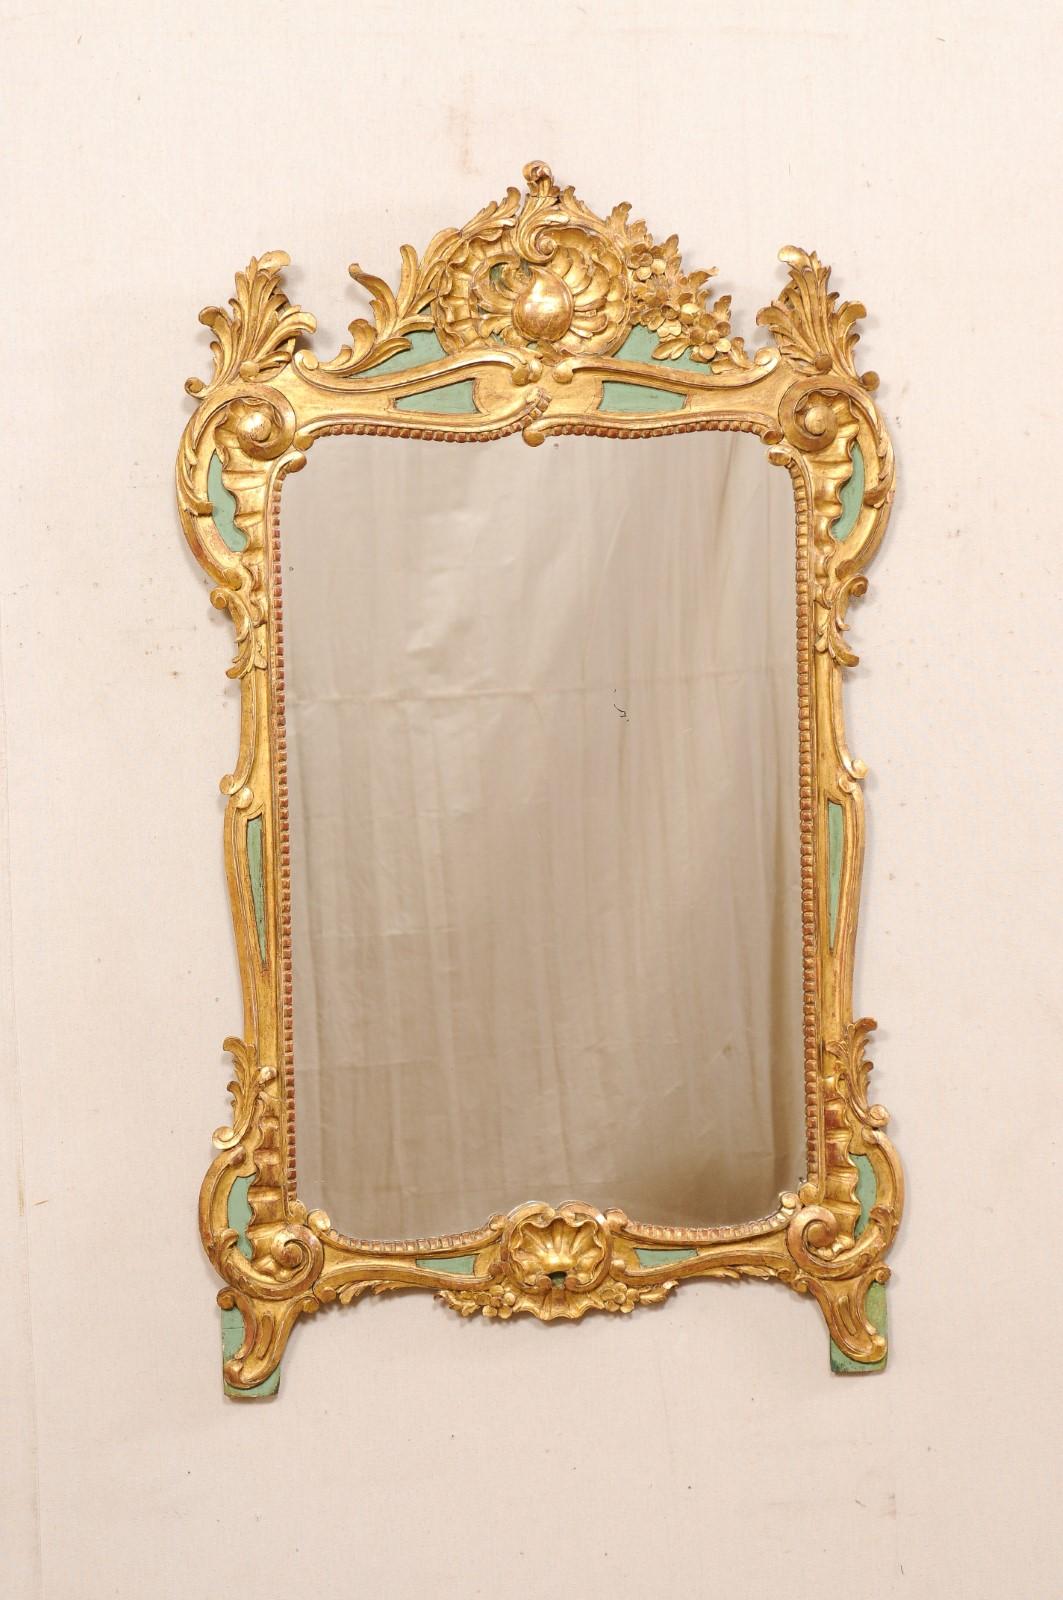 A French rococo style carved and gilt/painted wood mirror from the early 20th century. This antique mirror from France features a rectangular- shaped mirror with shapely surround in a gilt wood with elaborately carved rinceaux with shell at top